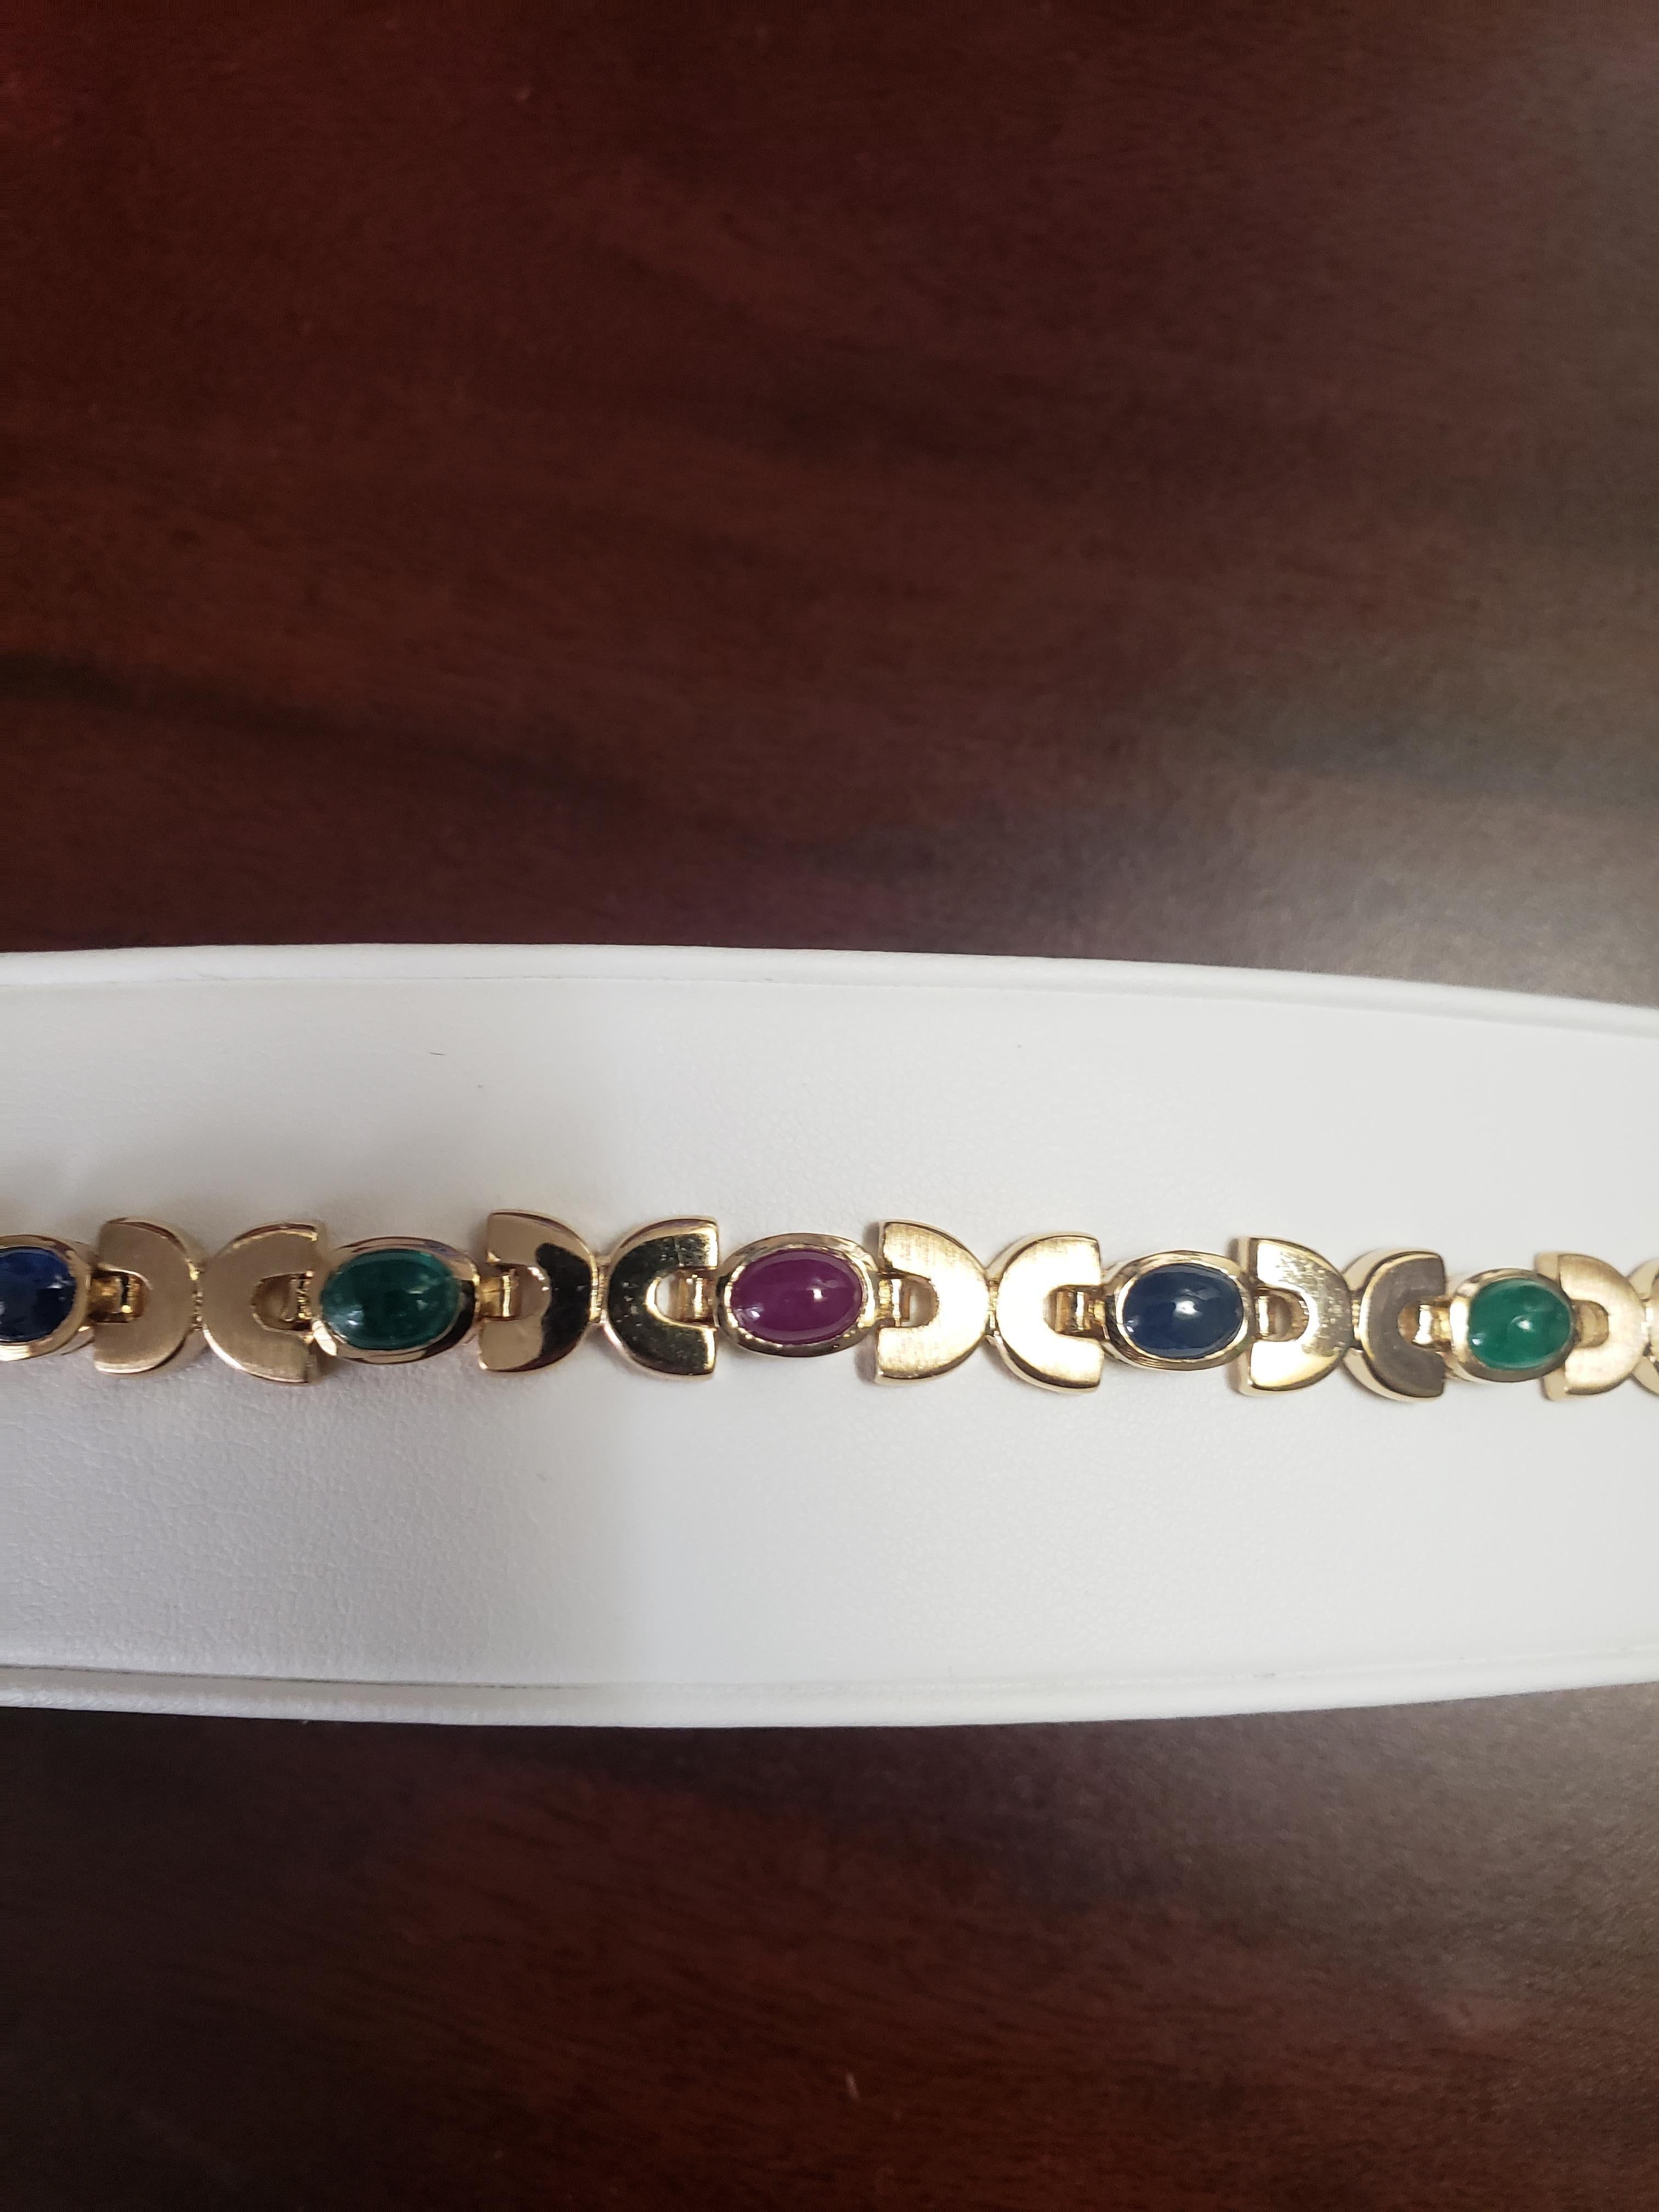 NEW Natural Ruby, Sapphire, Emerald Cabochon Bracelet in 14k Yellow Gold New For Sale 3